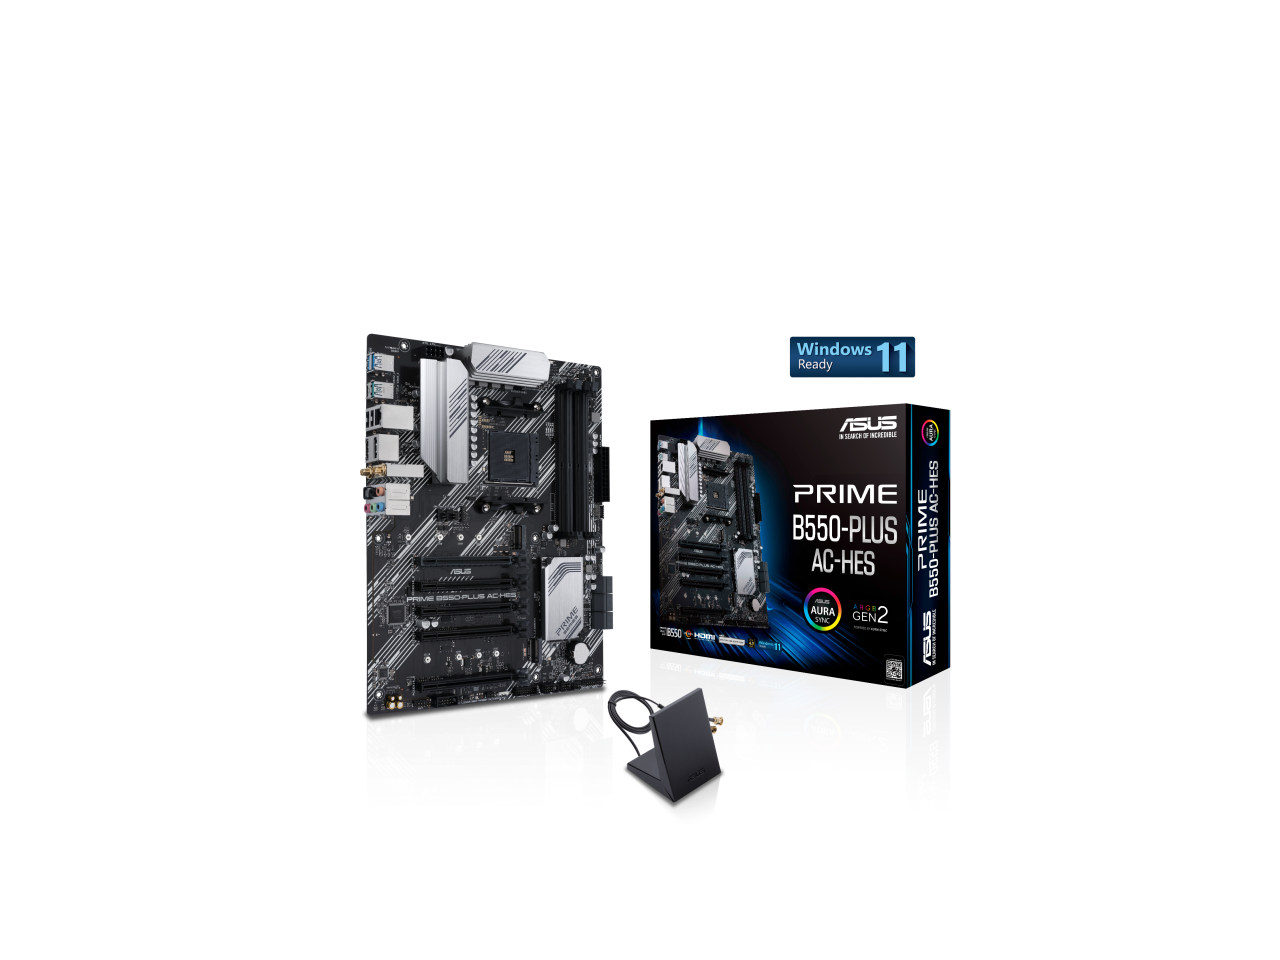 ASUS Prime B550-PLUS AC-HES AMD AM4 (3rd Gen Ryzen) ATX Motherboard $110 + Free Shipping